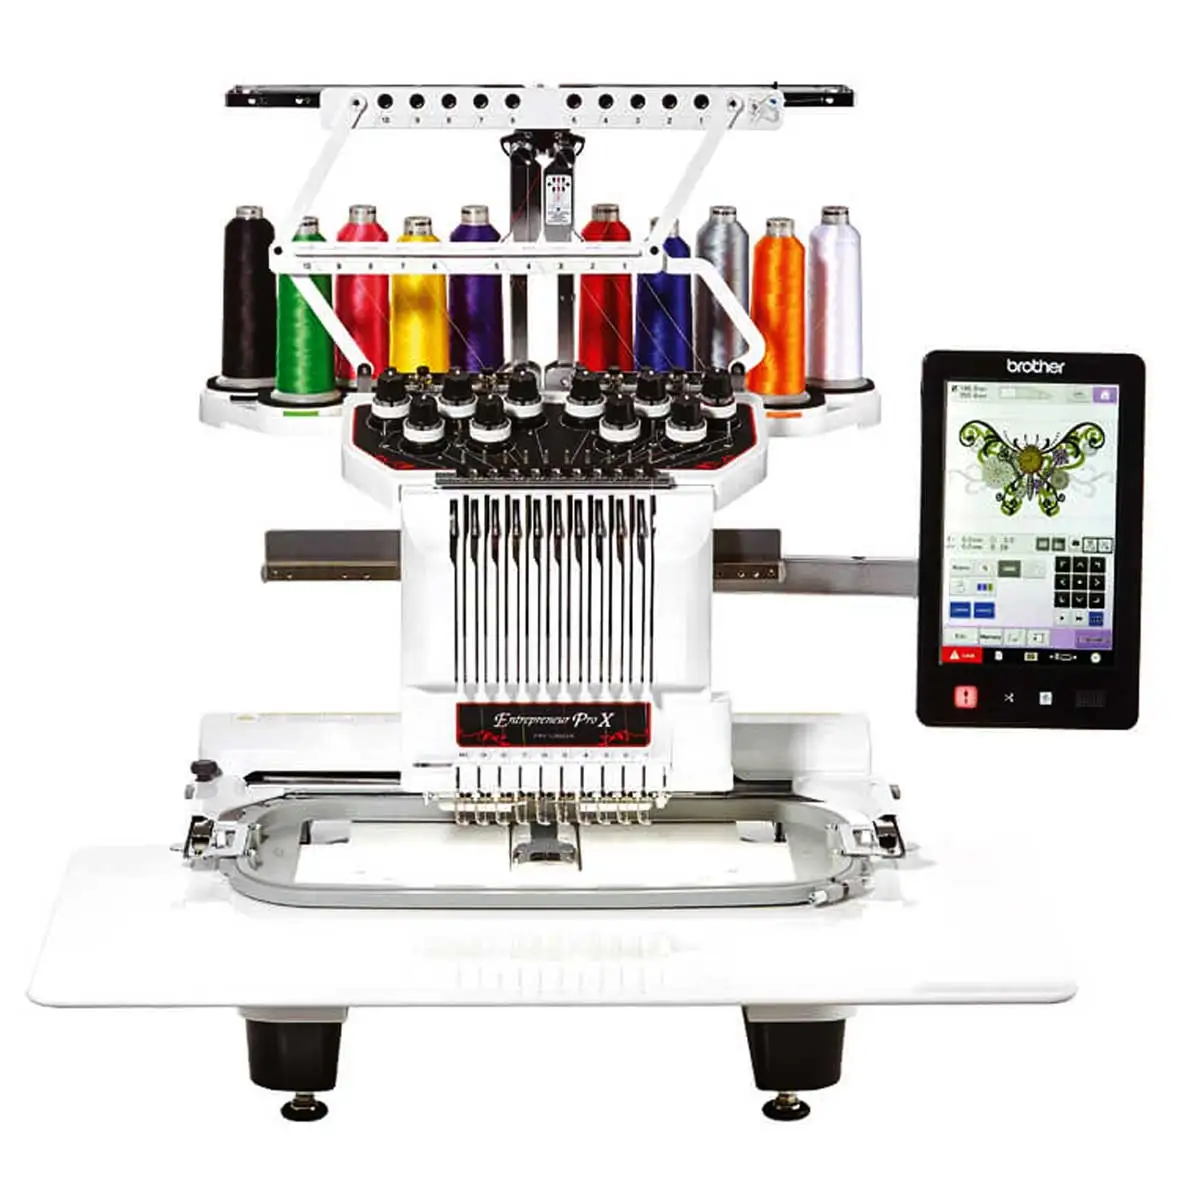 SUMMER SALES DISCOUNT ON 100% original 20232 BROTHER PR1050X Commercial Embroidery Machine PR1050X 10-Needle Home Embroidery